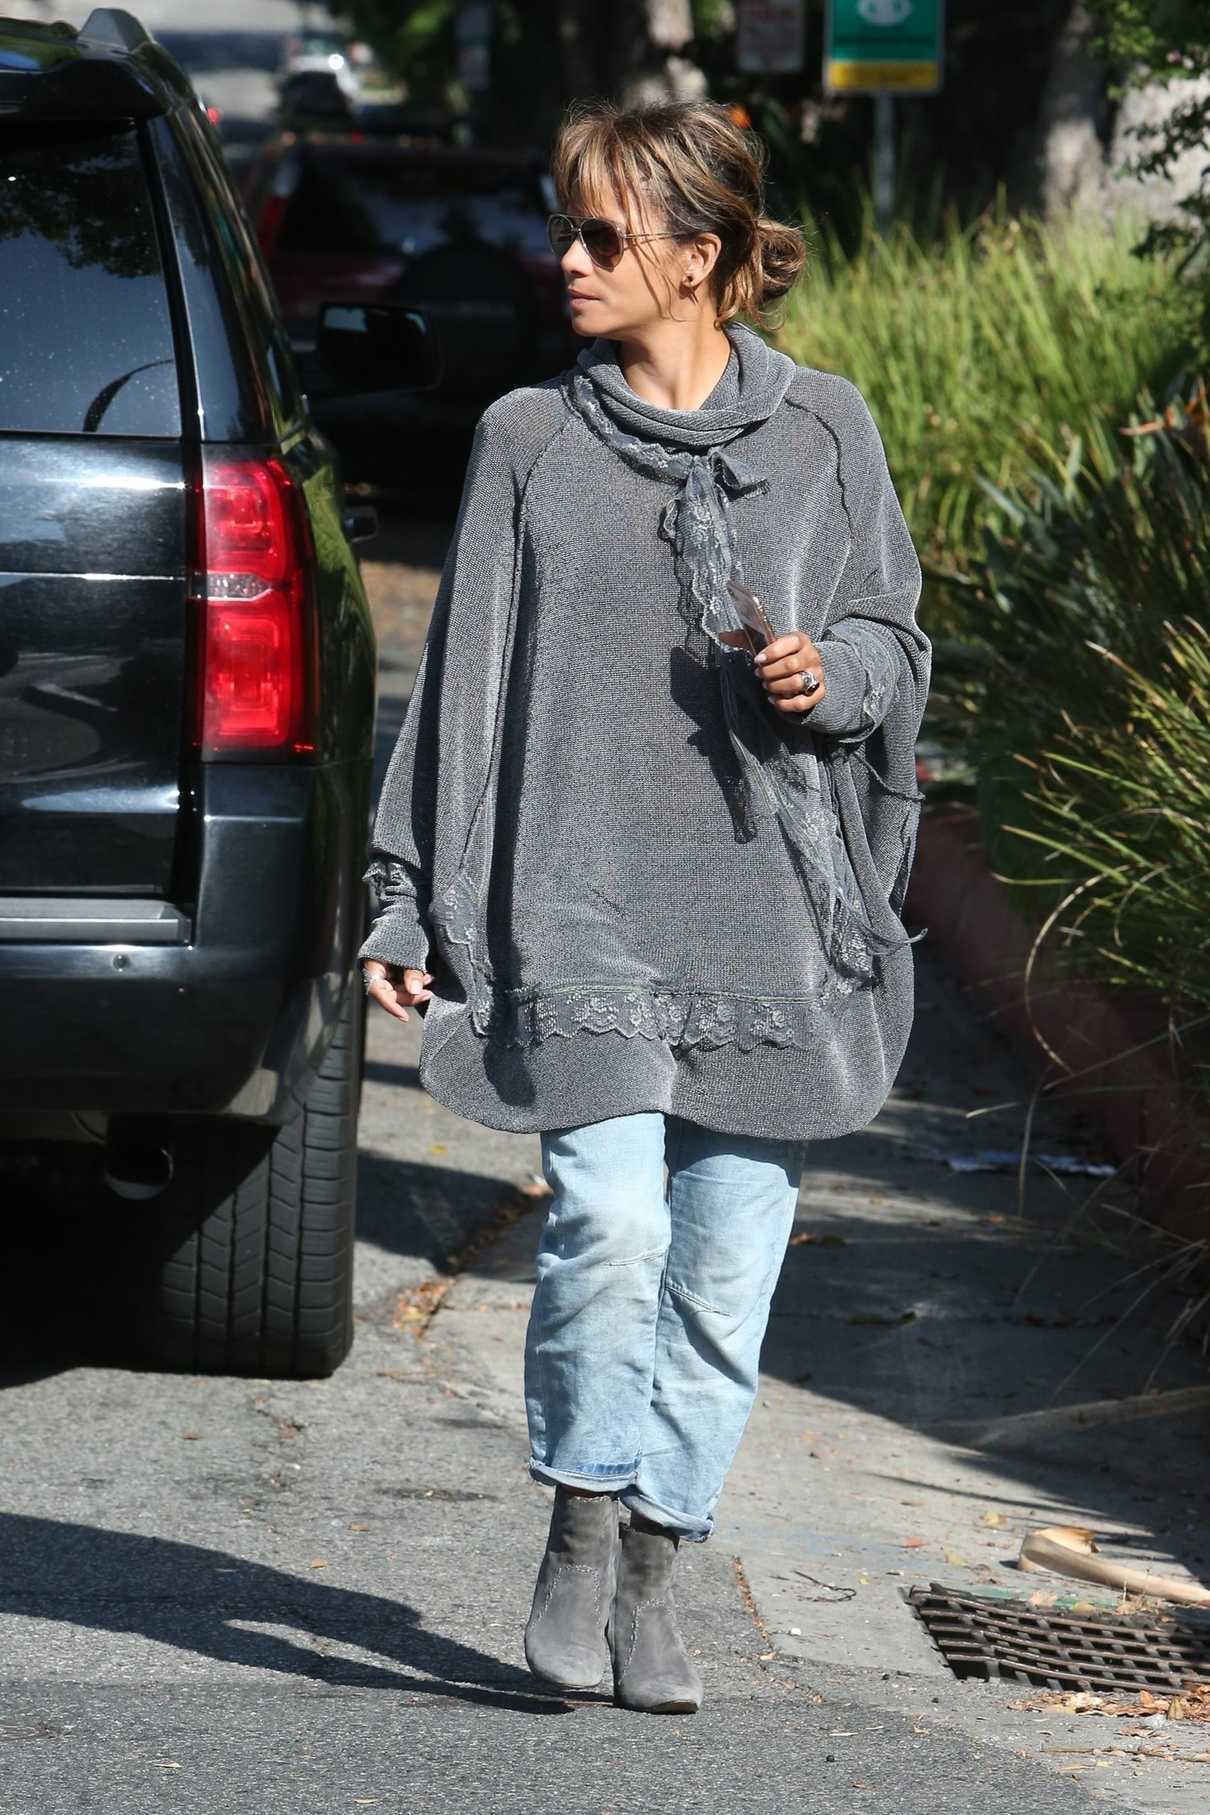 Halle Berry in a Gray Cardigan